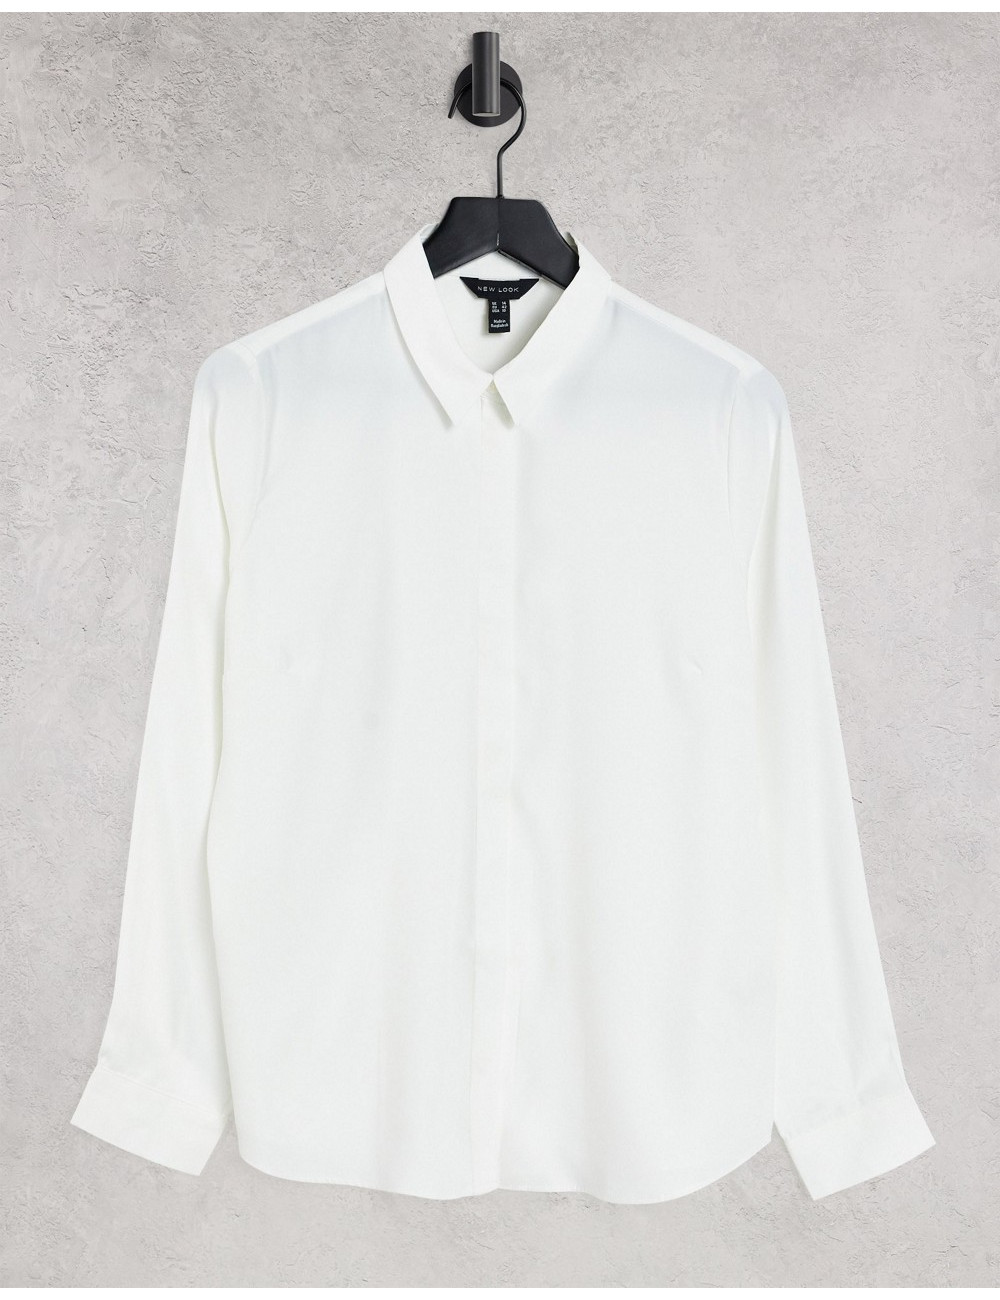 New Look button shirt in white